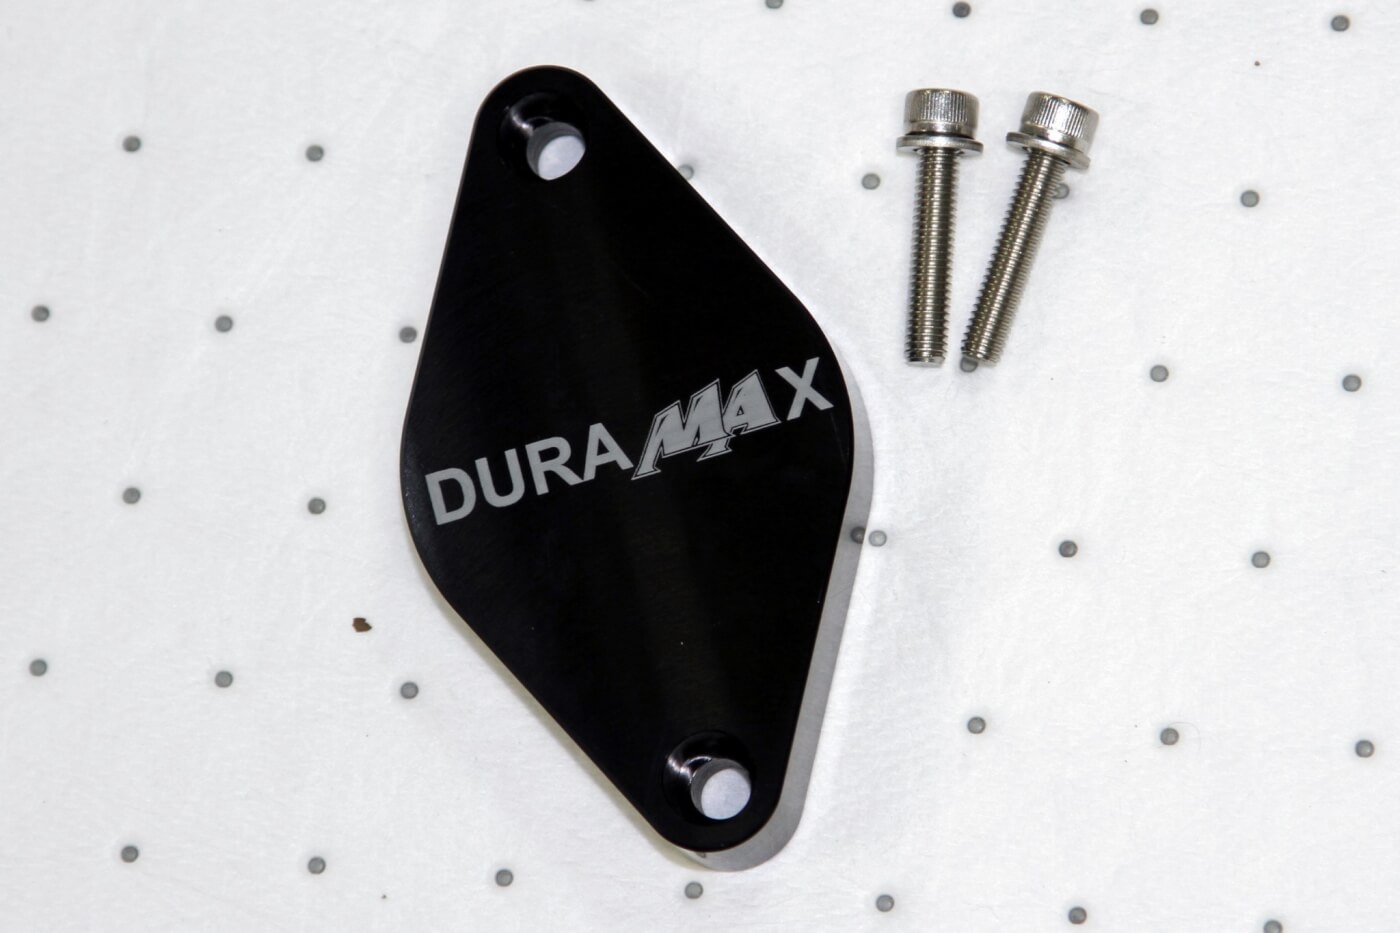 2. The Turbo Resonator Delete Plate comes with the billet aluminum plate and stainless steel mounting hardware.